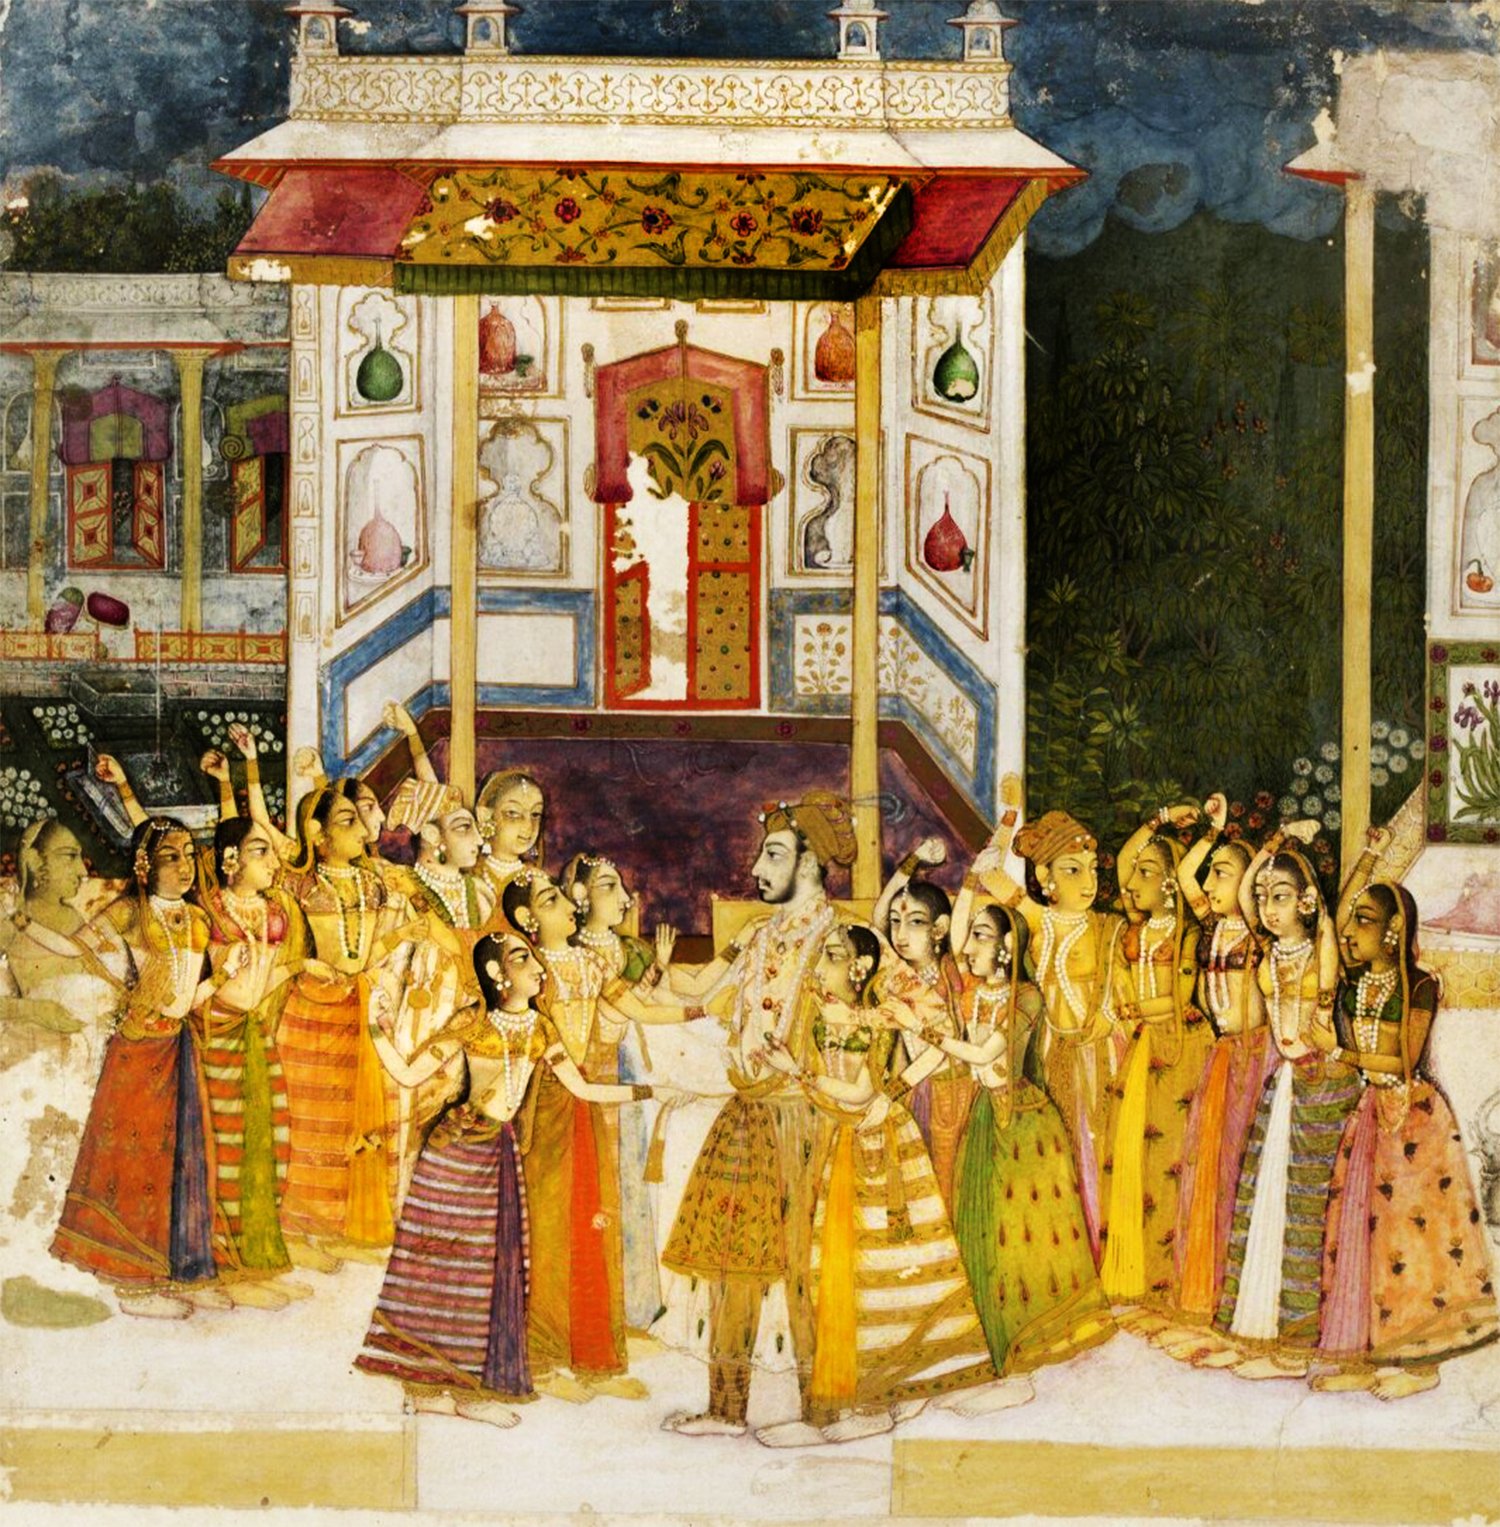 An opaque watercolor painting on paper depicting a Mughal prince being celebrated by the women of the palace, harem, or zenana. The prince stands at the center, surrounded by a group of elegantly dressed women who appear to be greeting or honoring him. The intricately detailed scene captures the rich attire and cultural setting of the period.